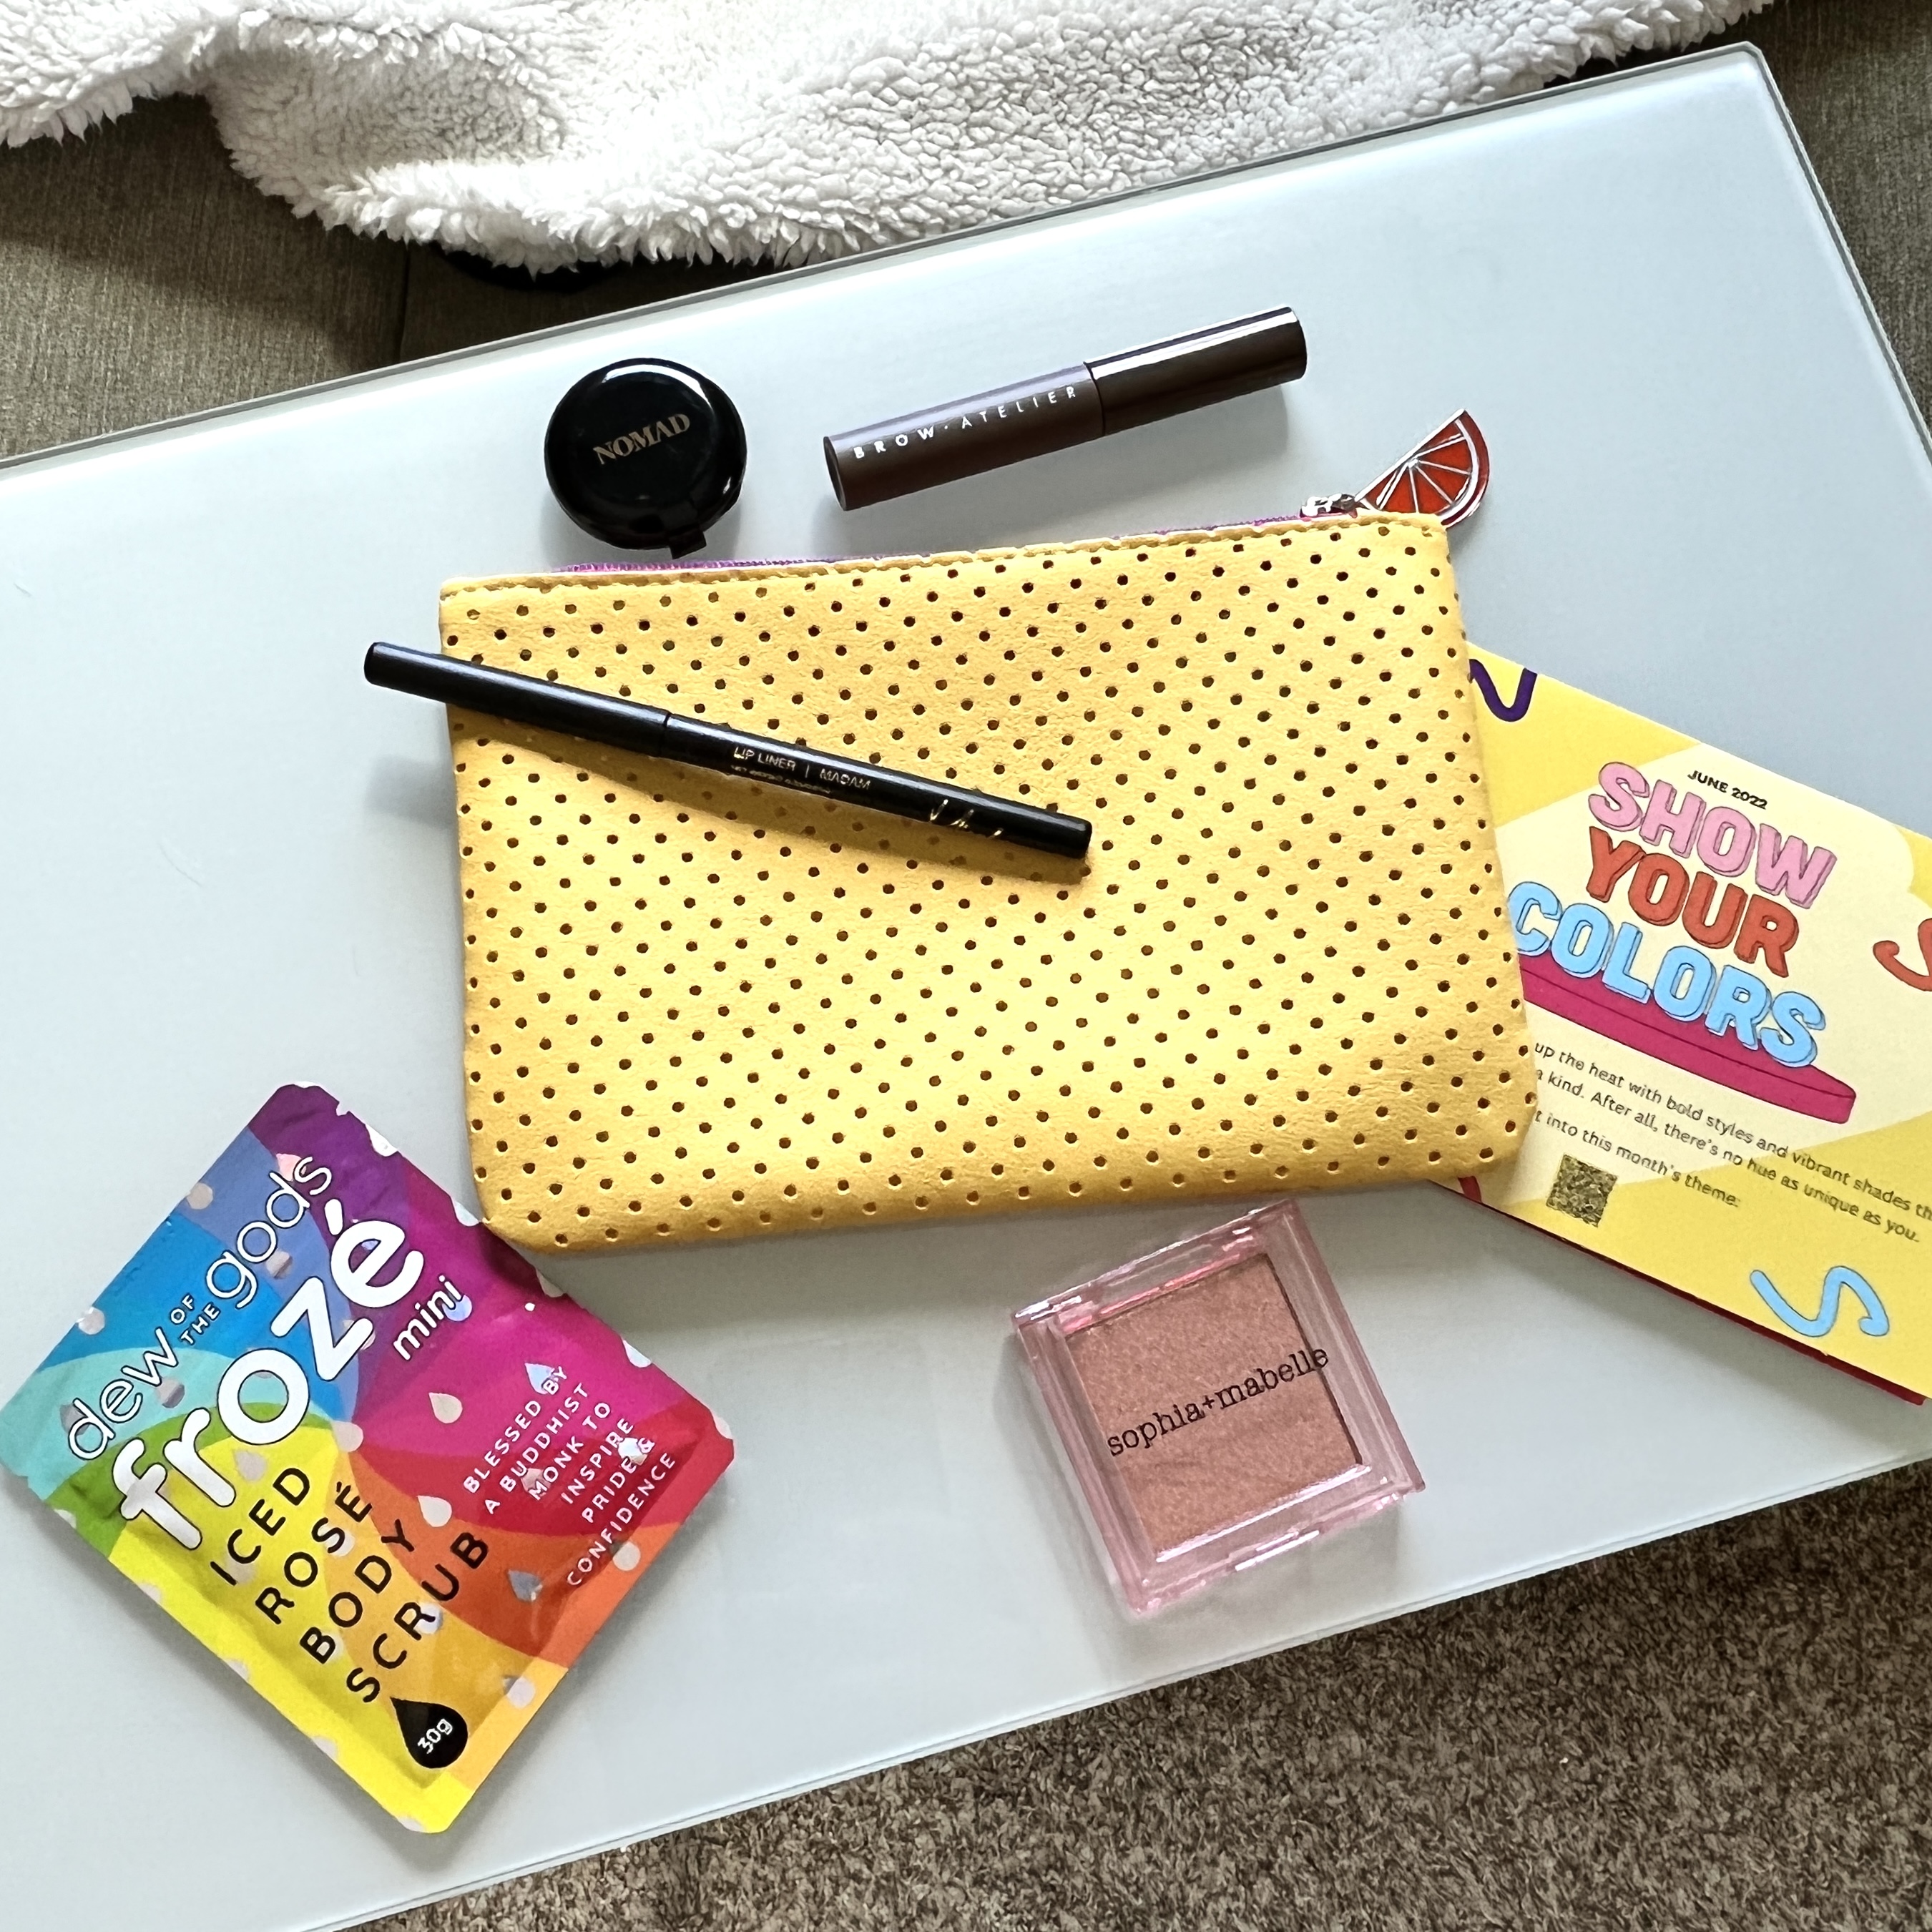 Full Contents for IPSY June 2022